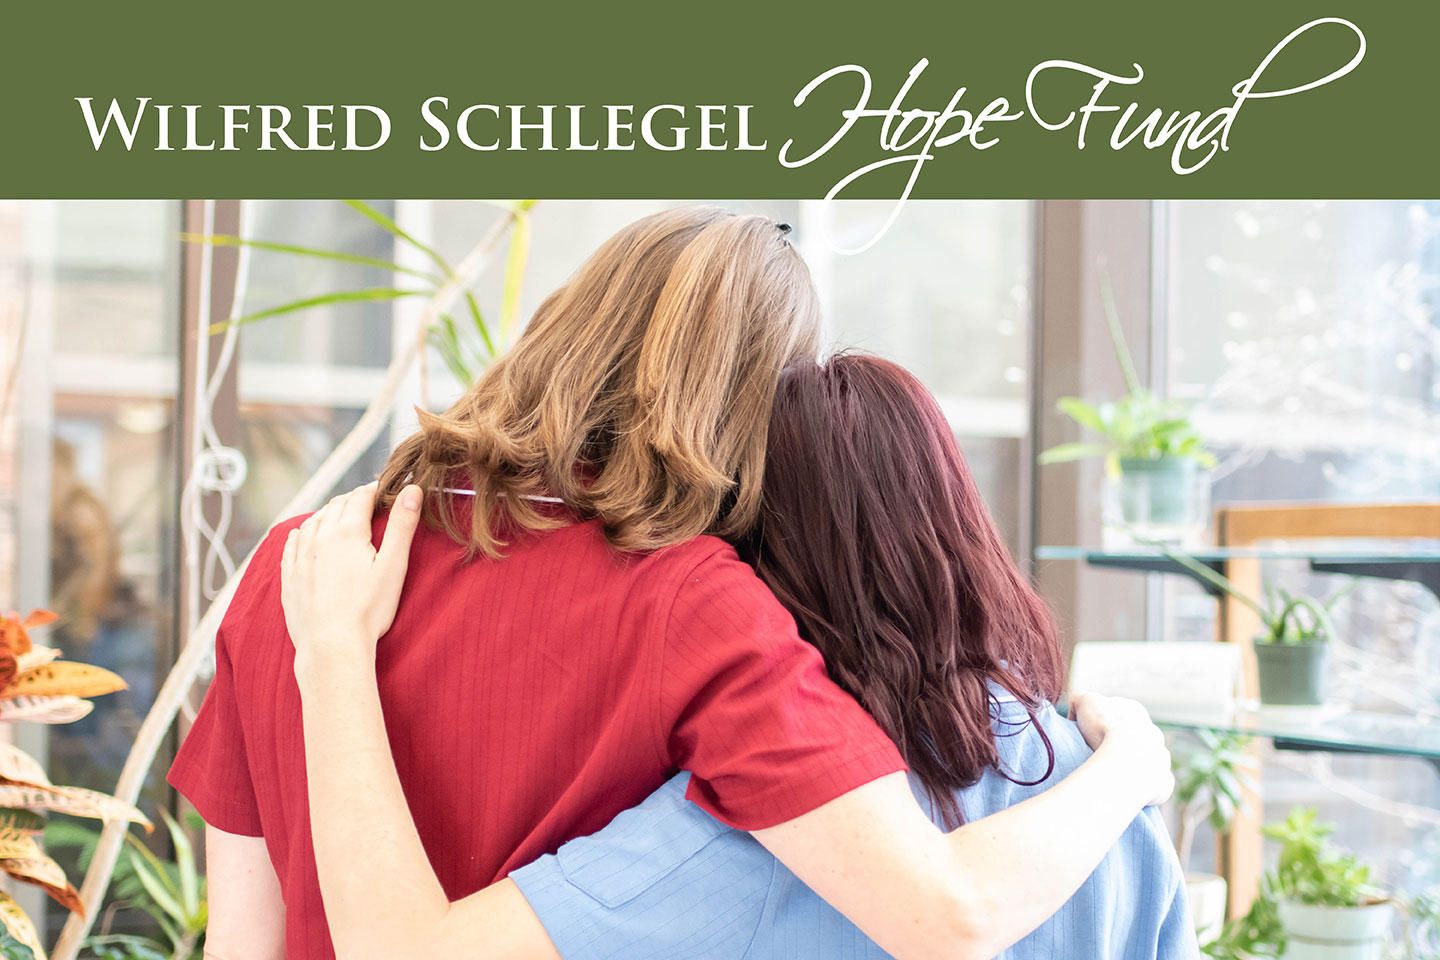 With the Wilfred Schlegel Hope Fund, team members can be "receivers of care," in times of need. 